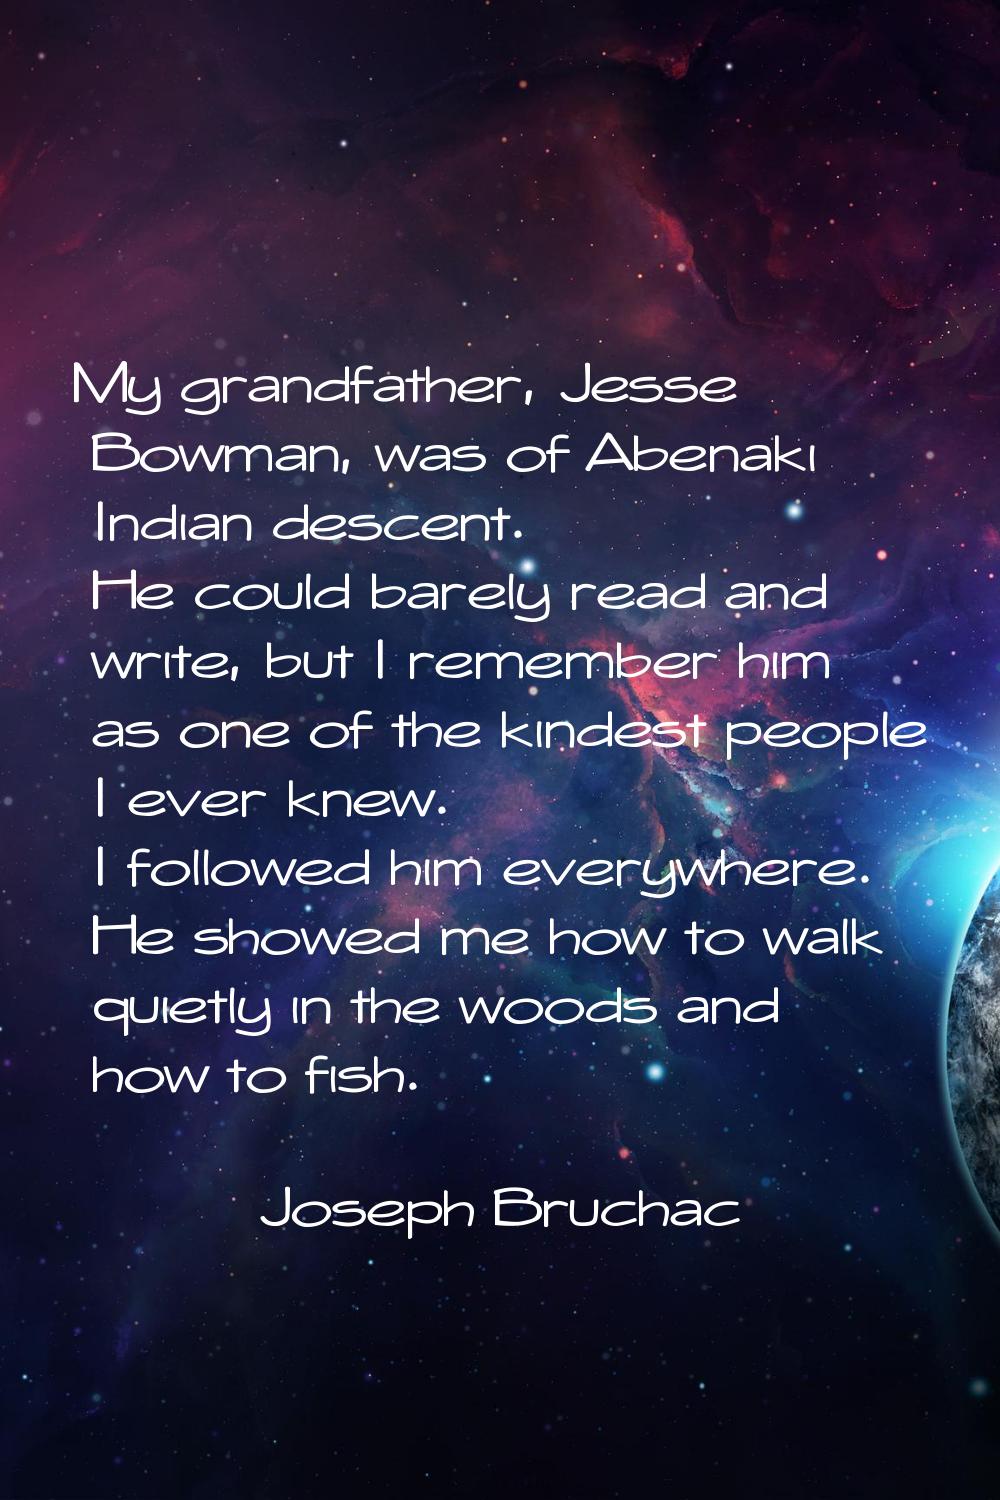 My grandfather, Jesse Bowman, was of Abenaki Indian descent. He could barely read and write, but I 